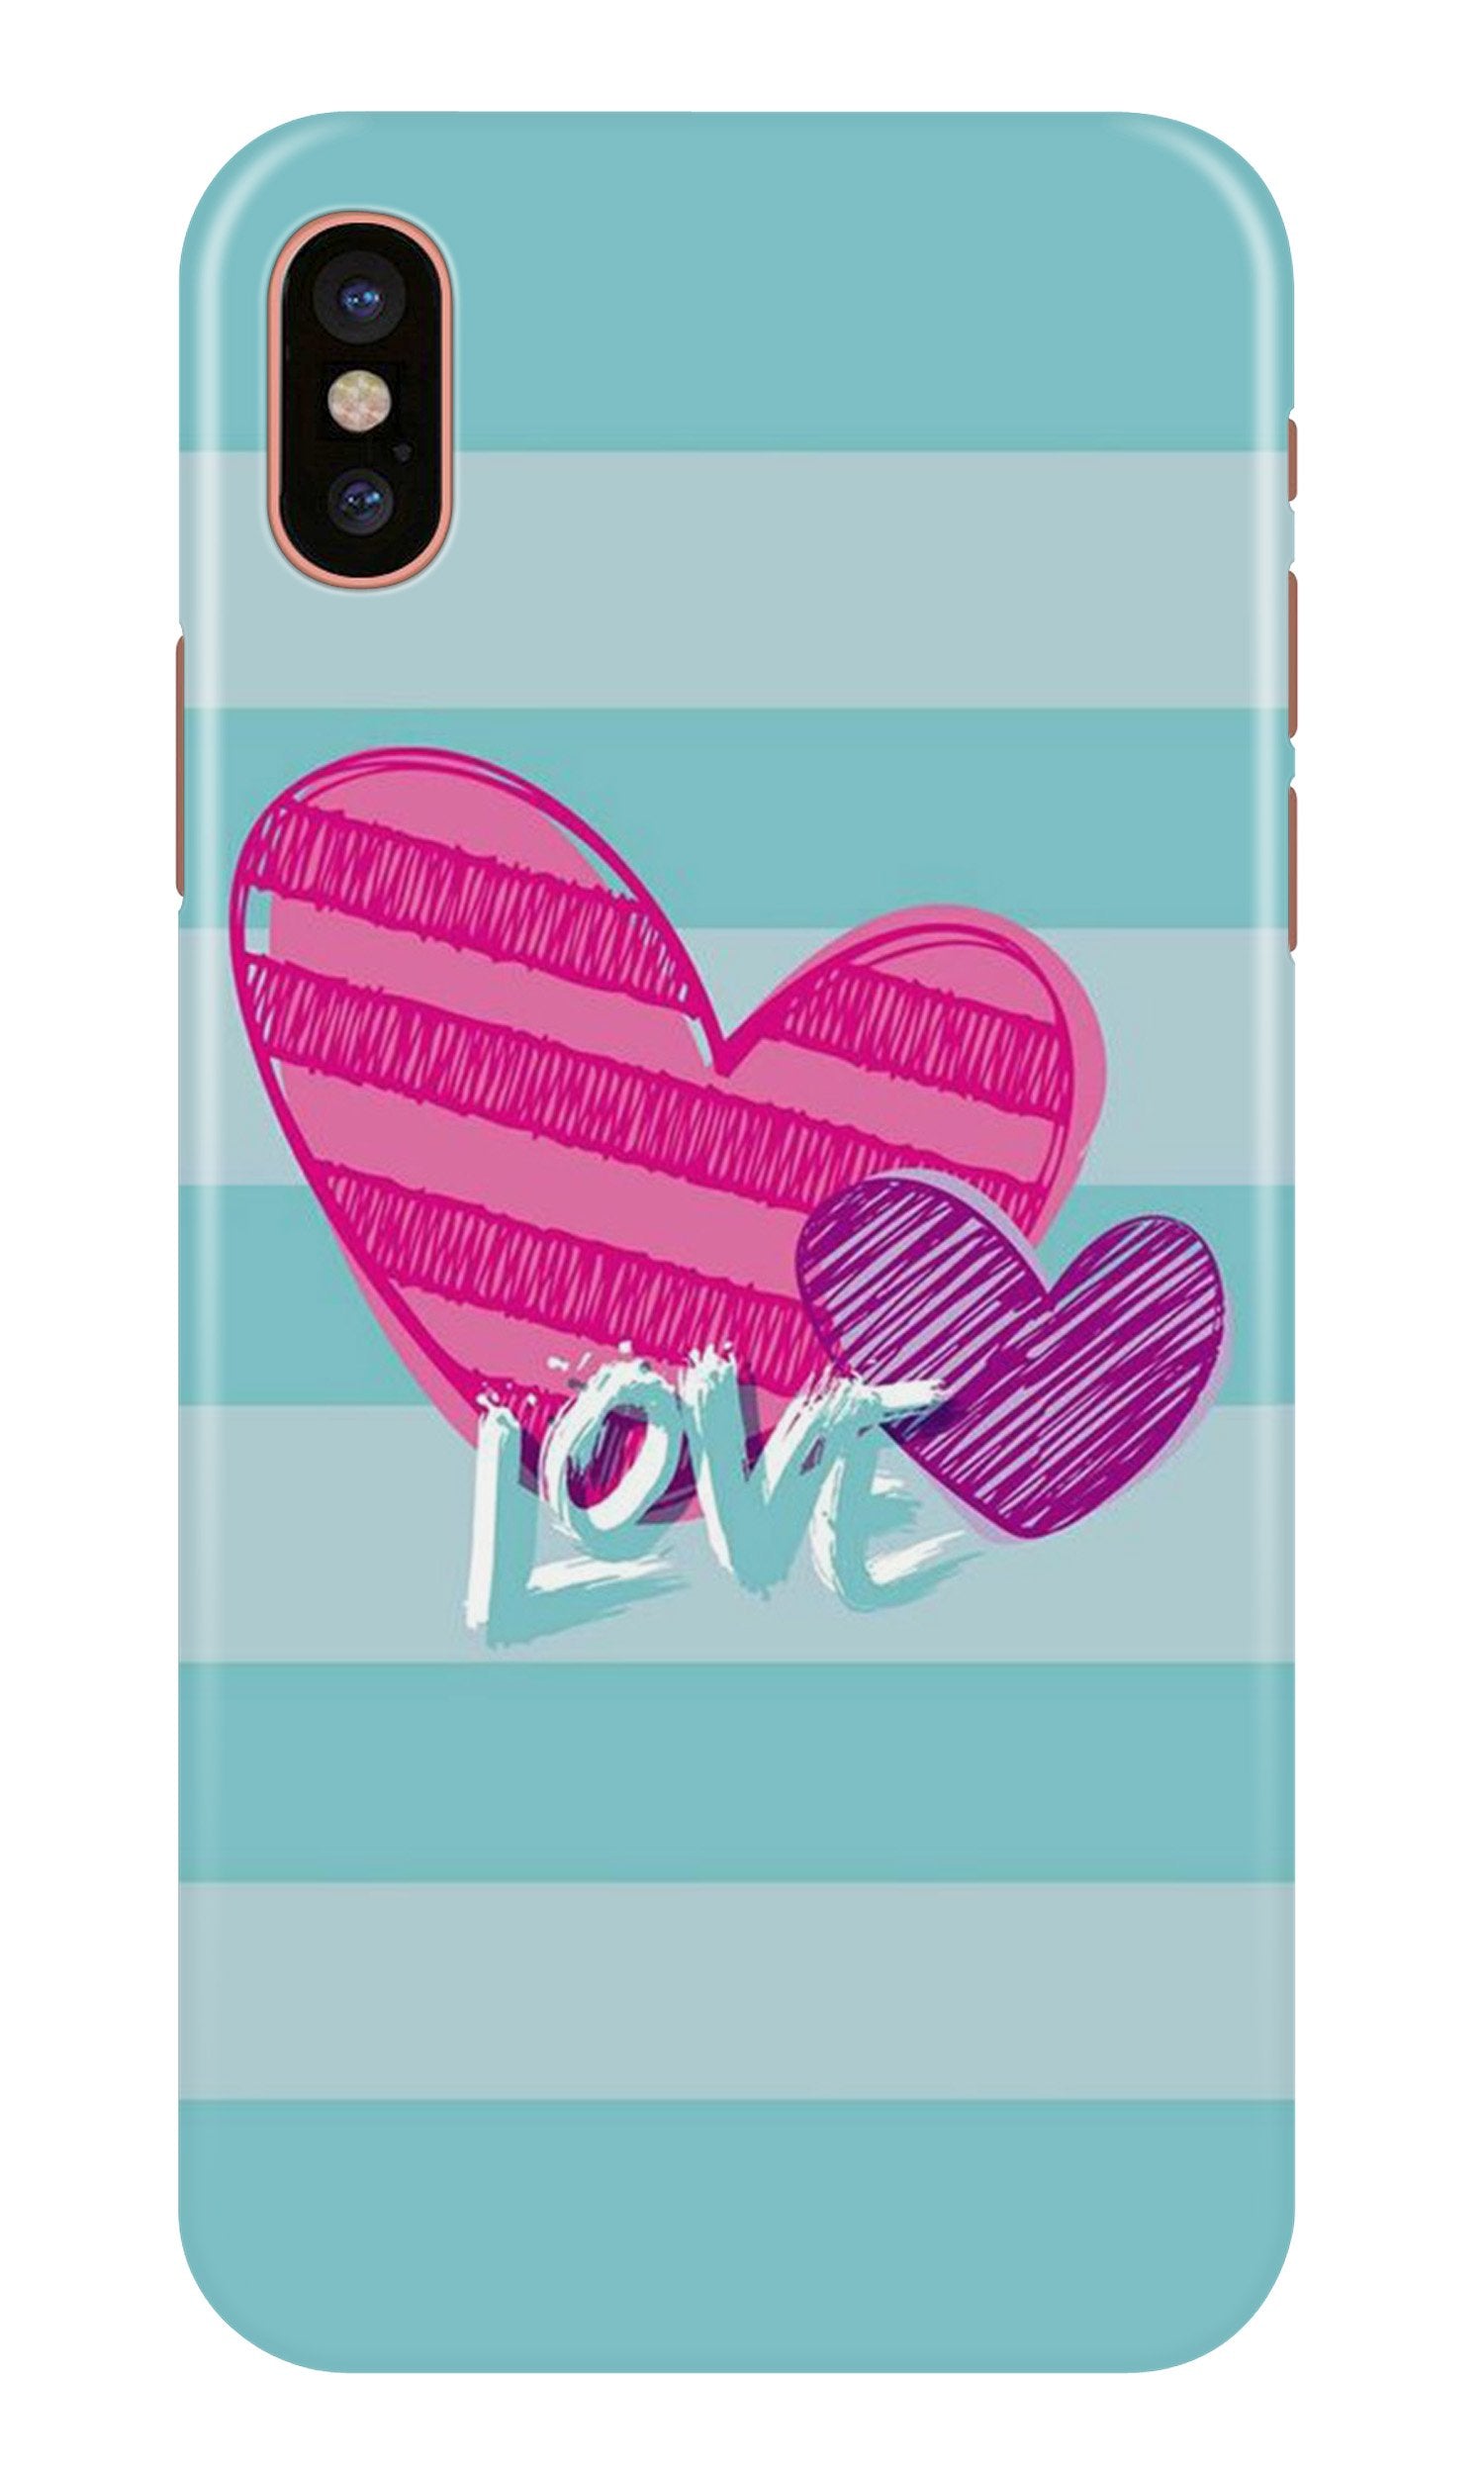 Love Case for iPhone X (Design No. 299)